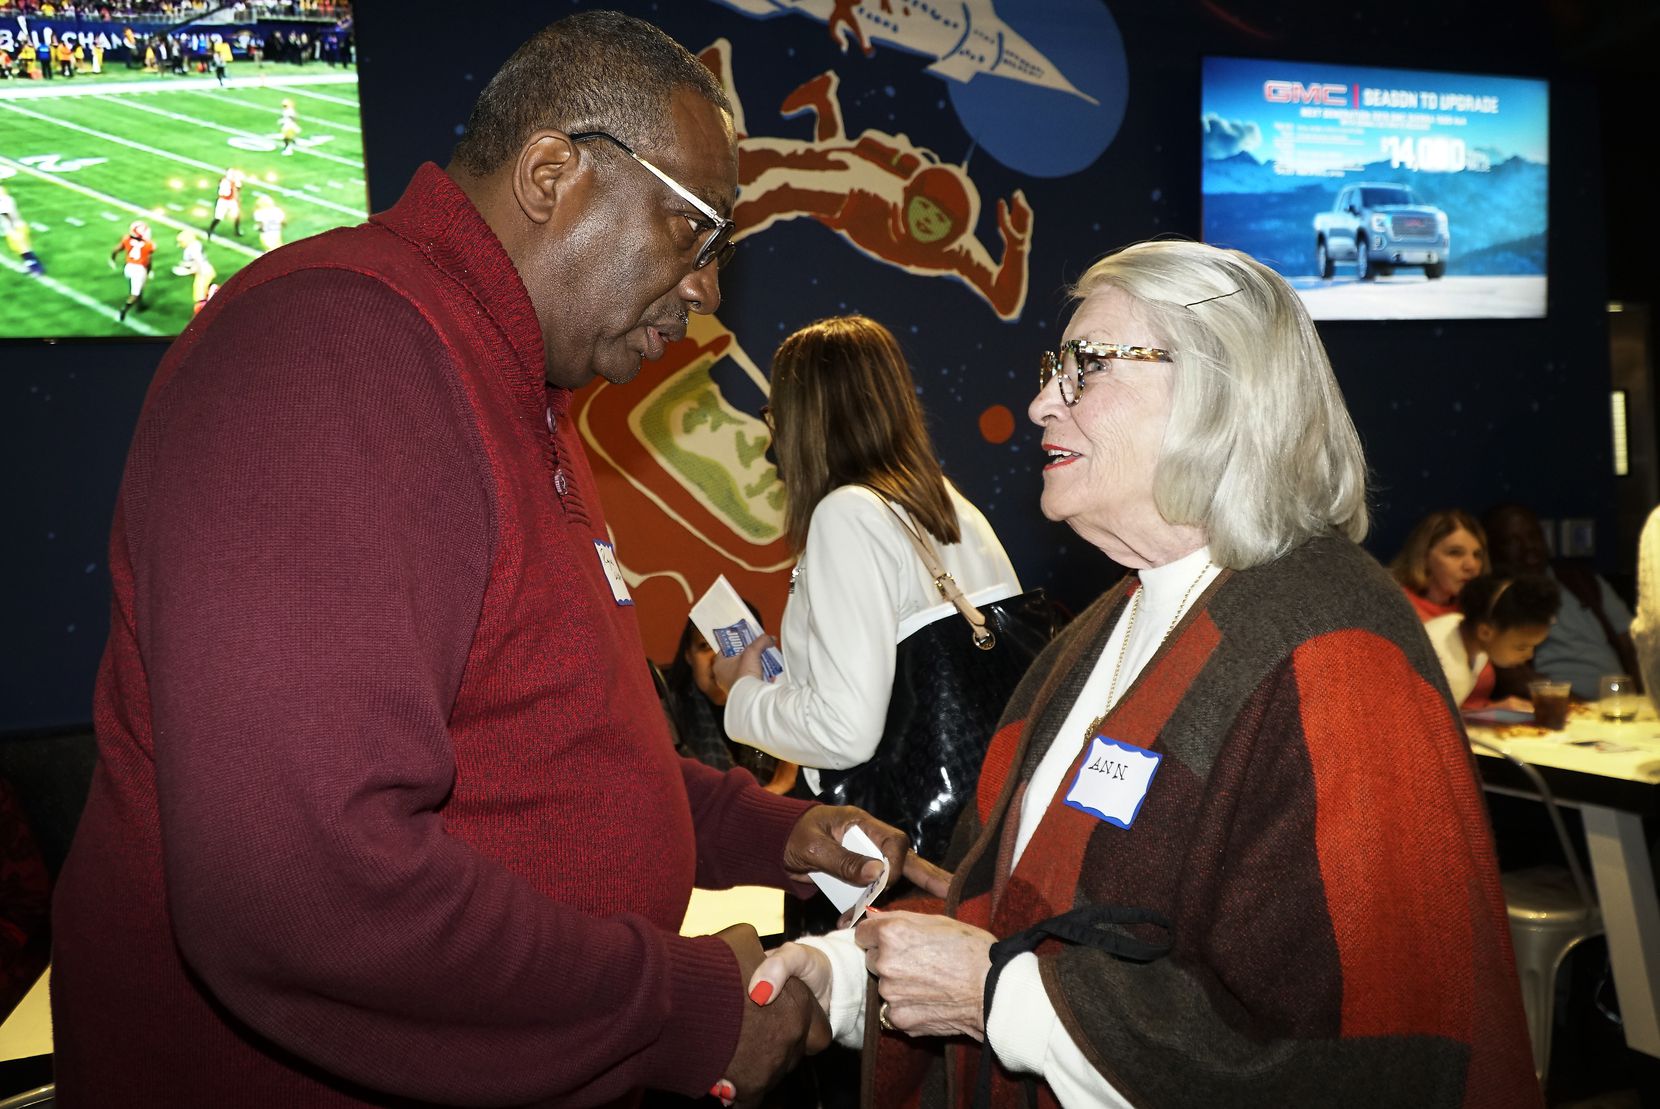 U.S. Senate hopeful Royce West, shown speaking with Ann Fichtenberg during the Texas Justice Tour at The Moon Bar in Fort Worth on Dec. 7, says a raft of Democratic candidates up and down statewide ballots will help defeat GOP incumbent John Cornyn.